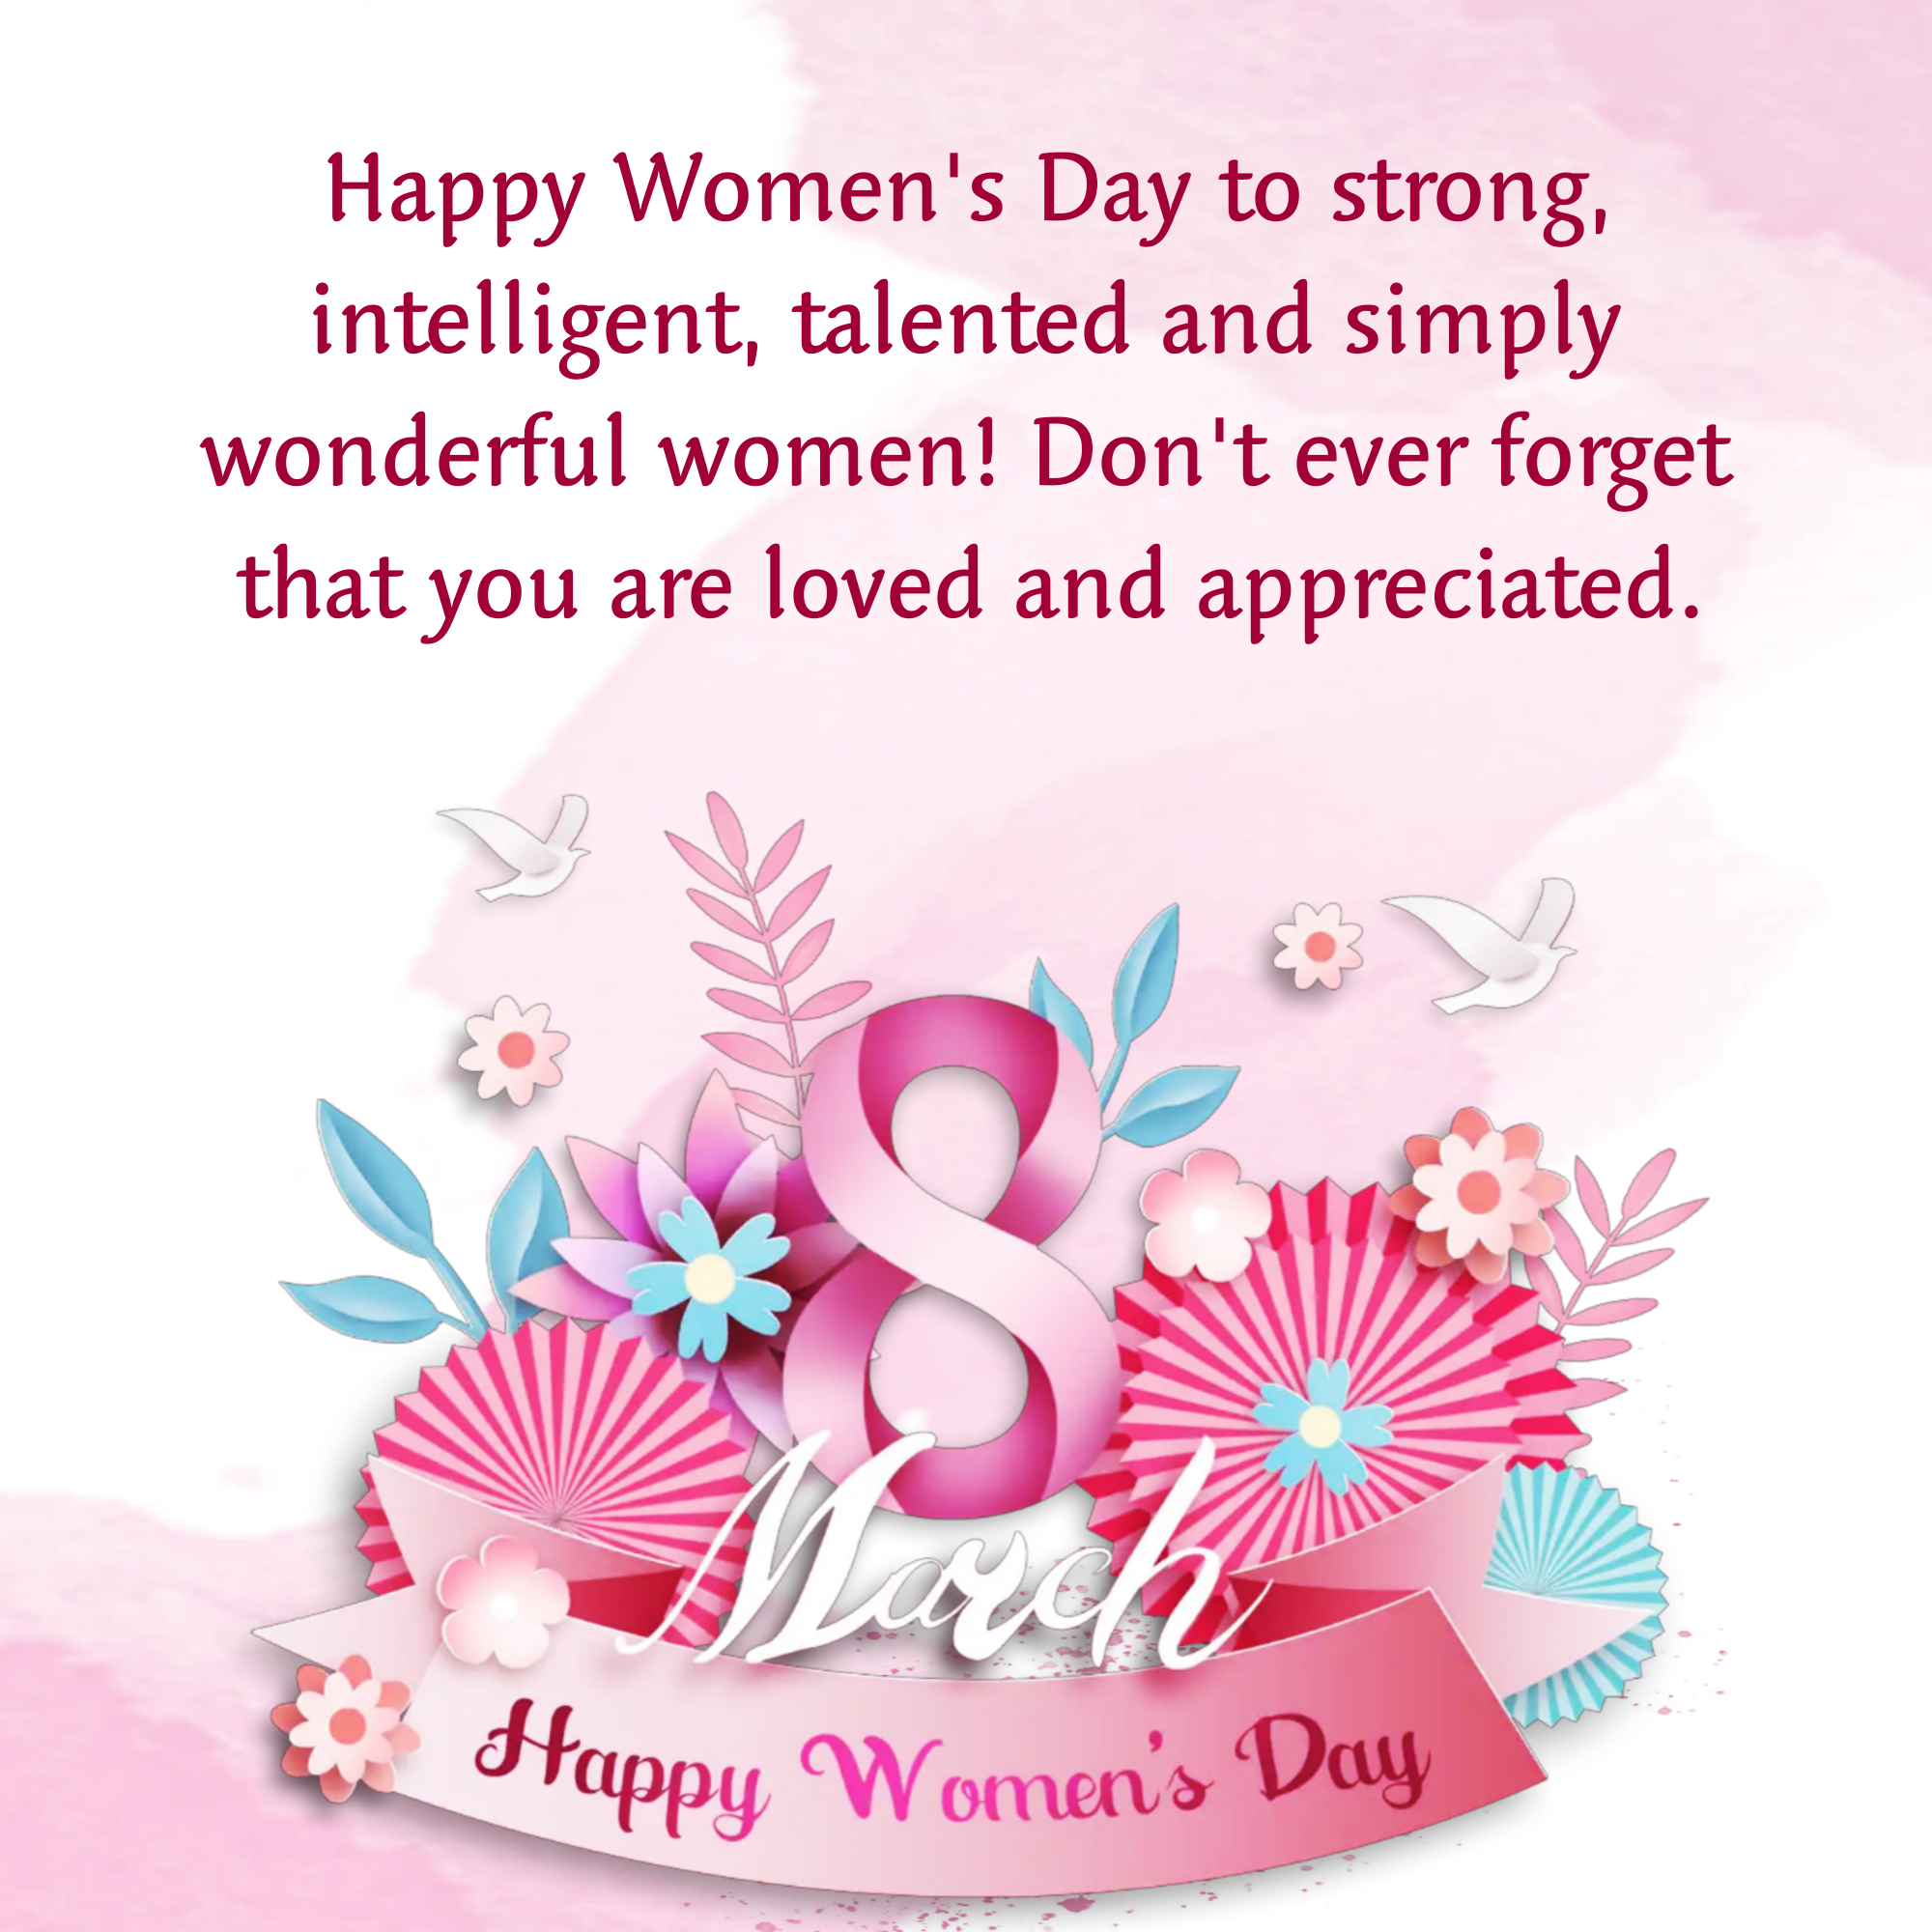 Happy Women's Day to strong intelligent talented